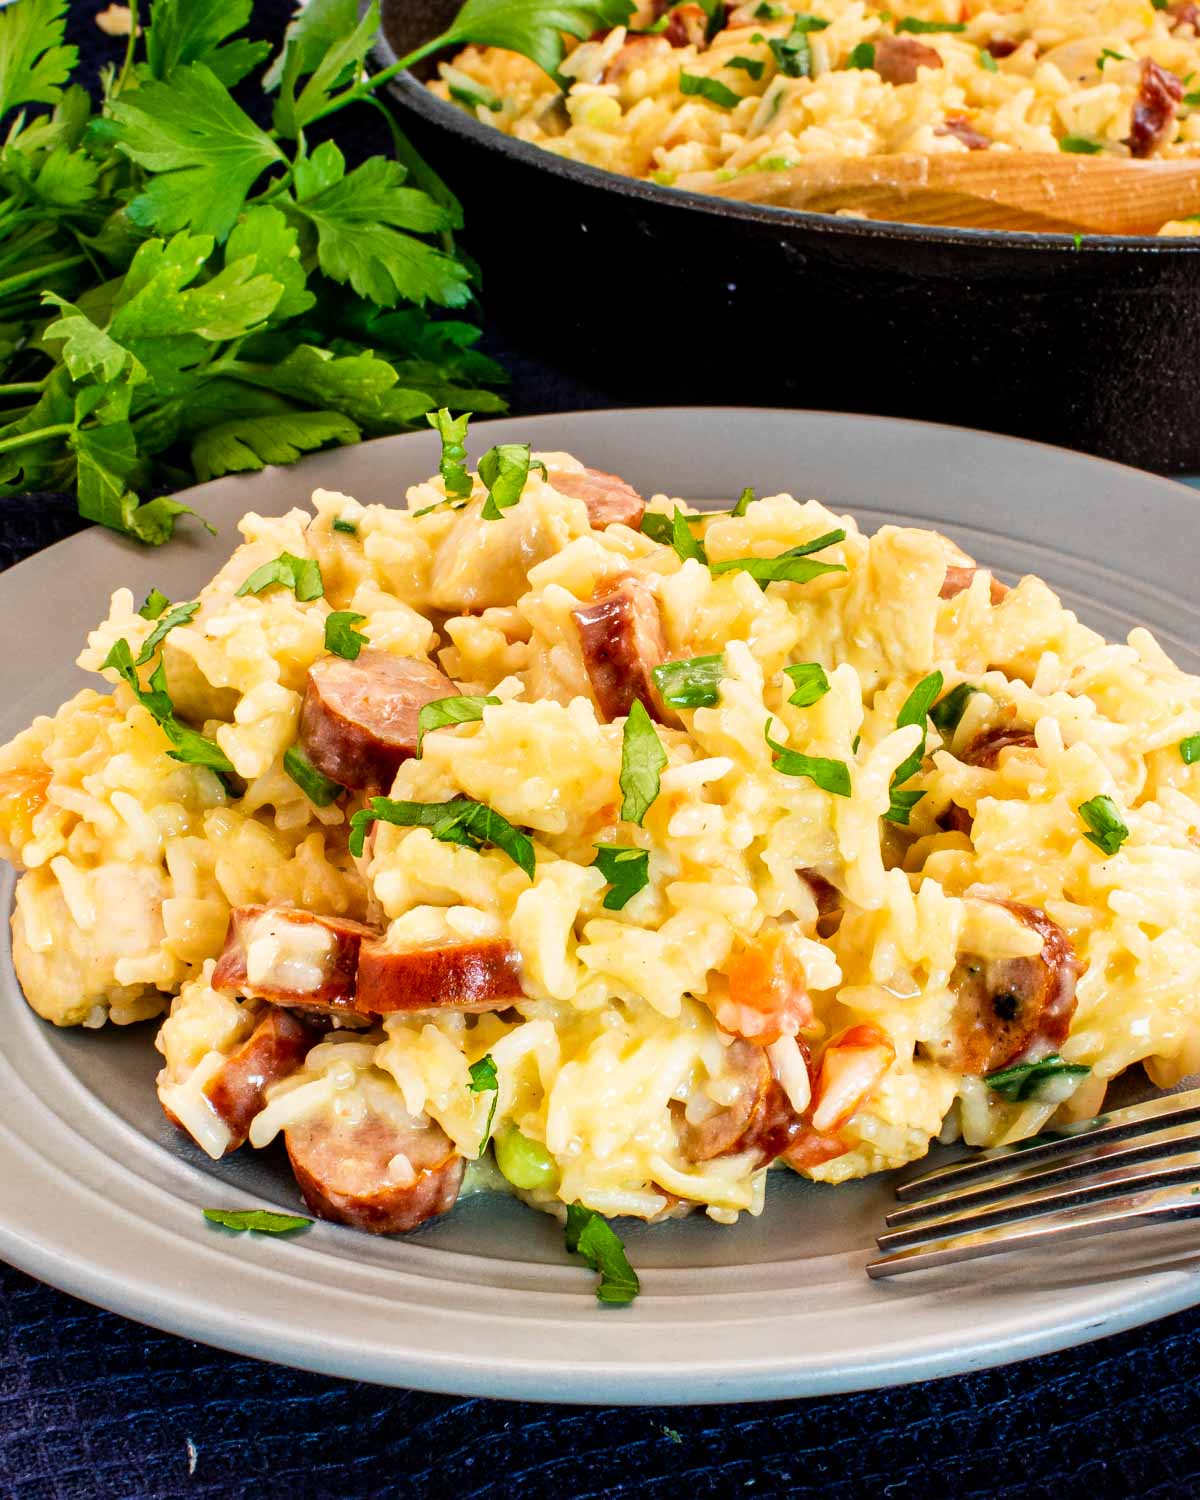 sausage chicken and cheesy rice in a plate garnished with parsley.